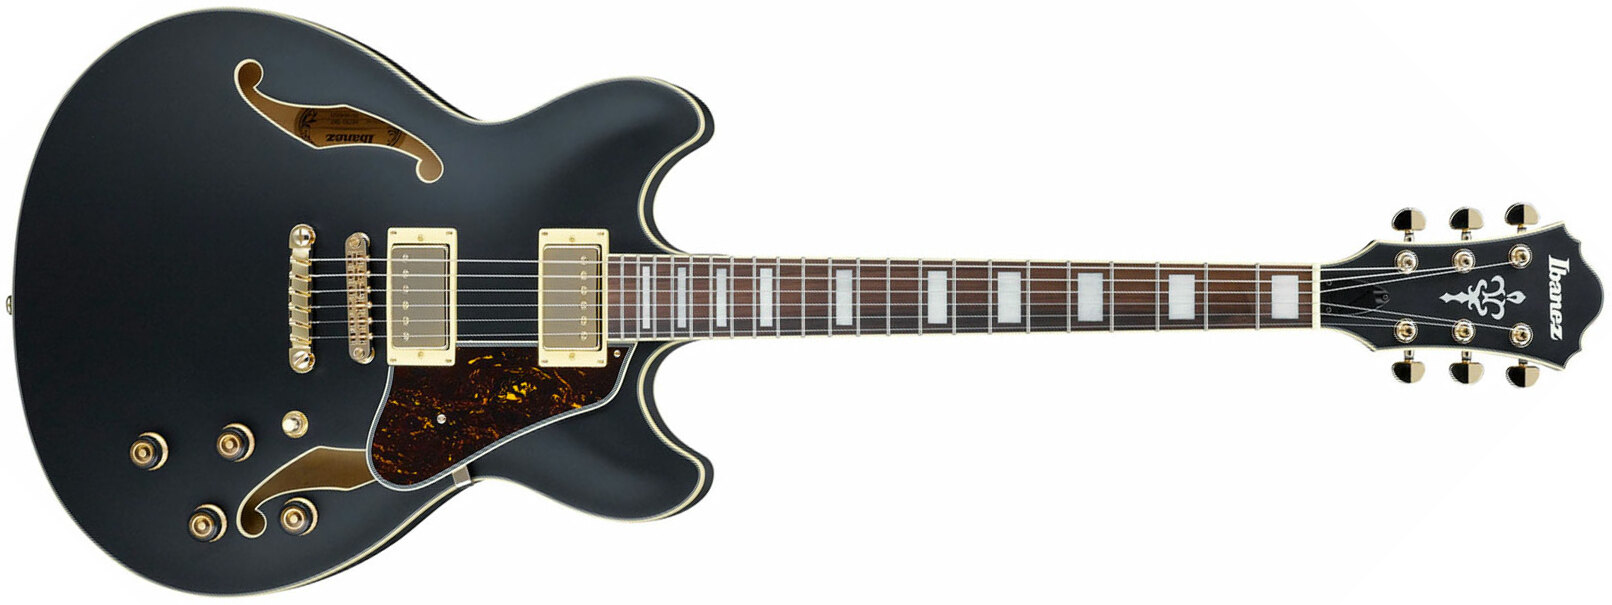 Ibanez As73g Bkf Artcore Hh Ht Rw - Black Flat - Semi-hollow electric guitar - Main picture